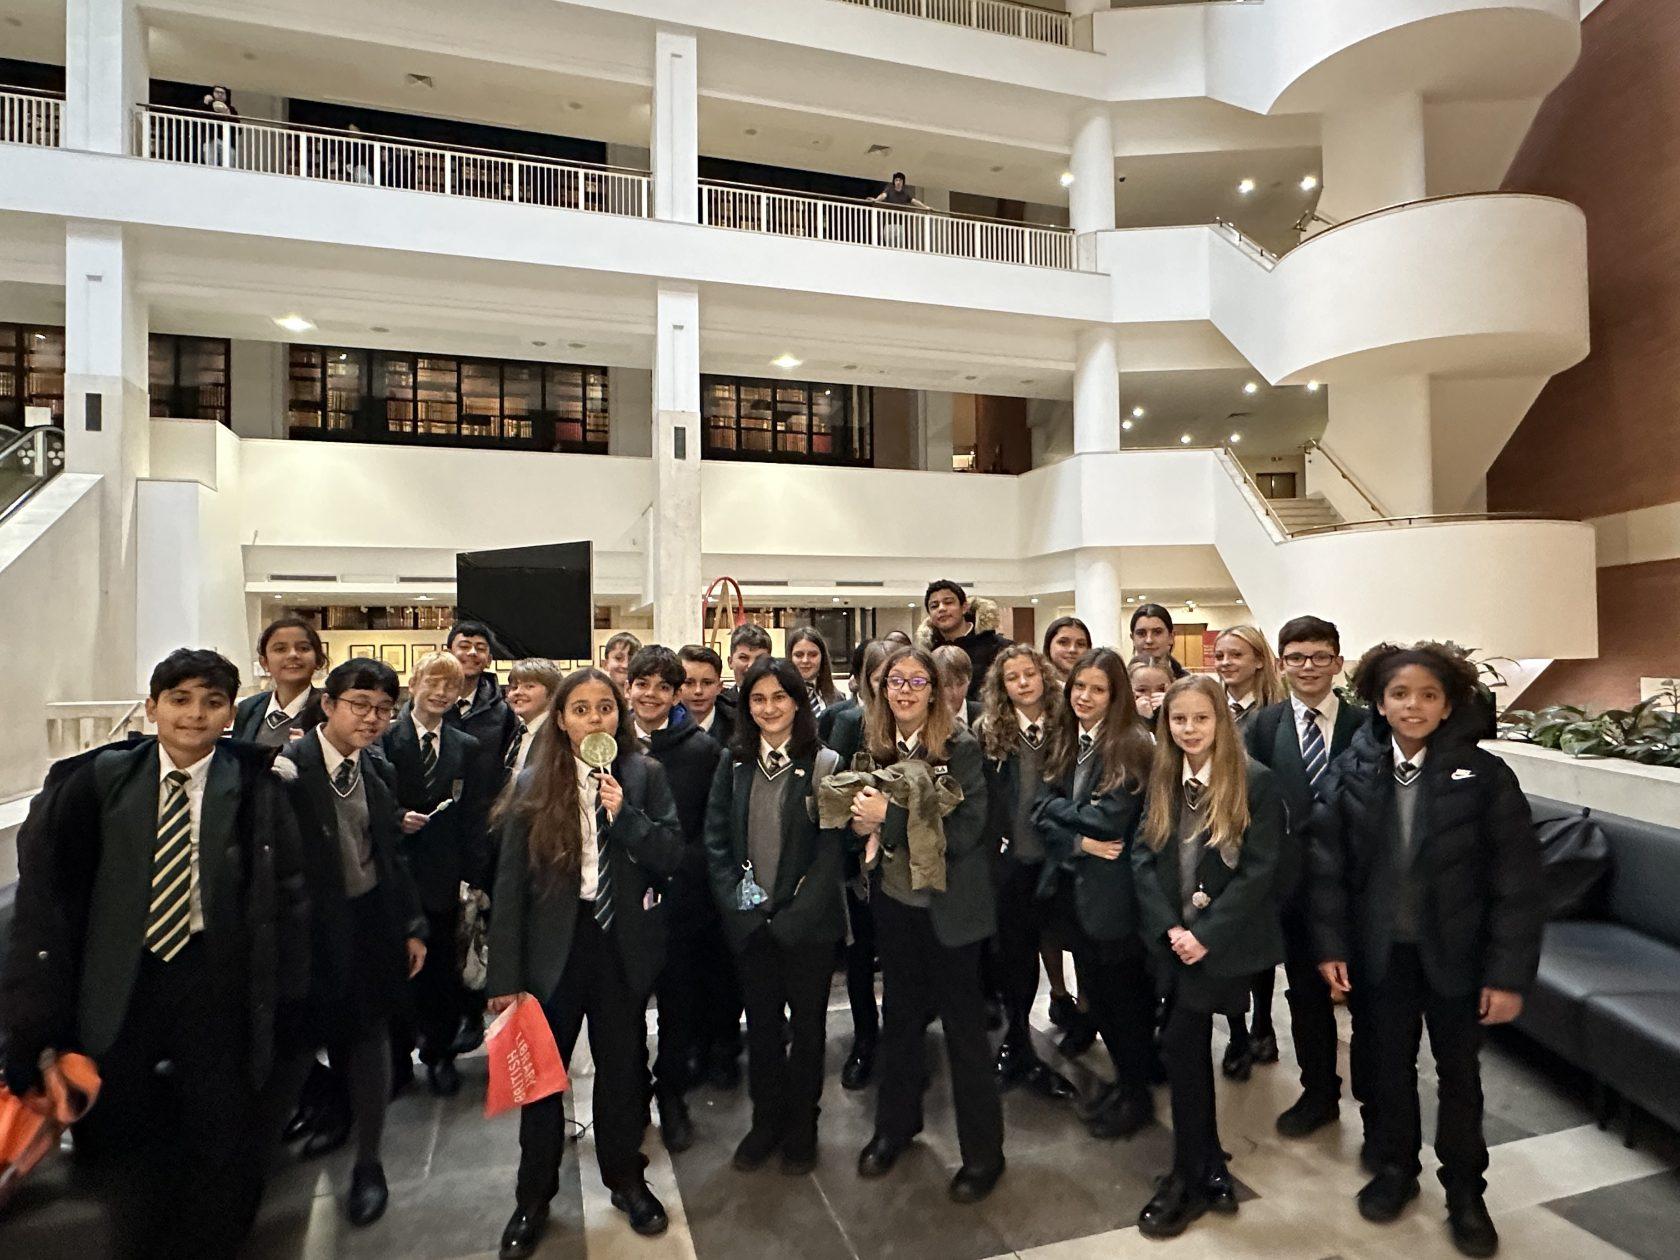 An Exciting Trip to the British Library!